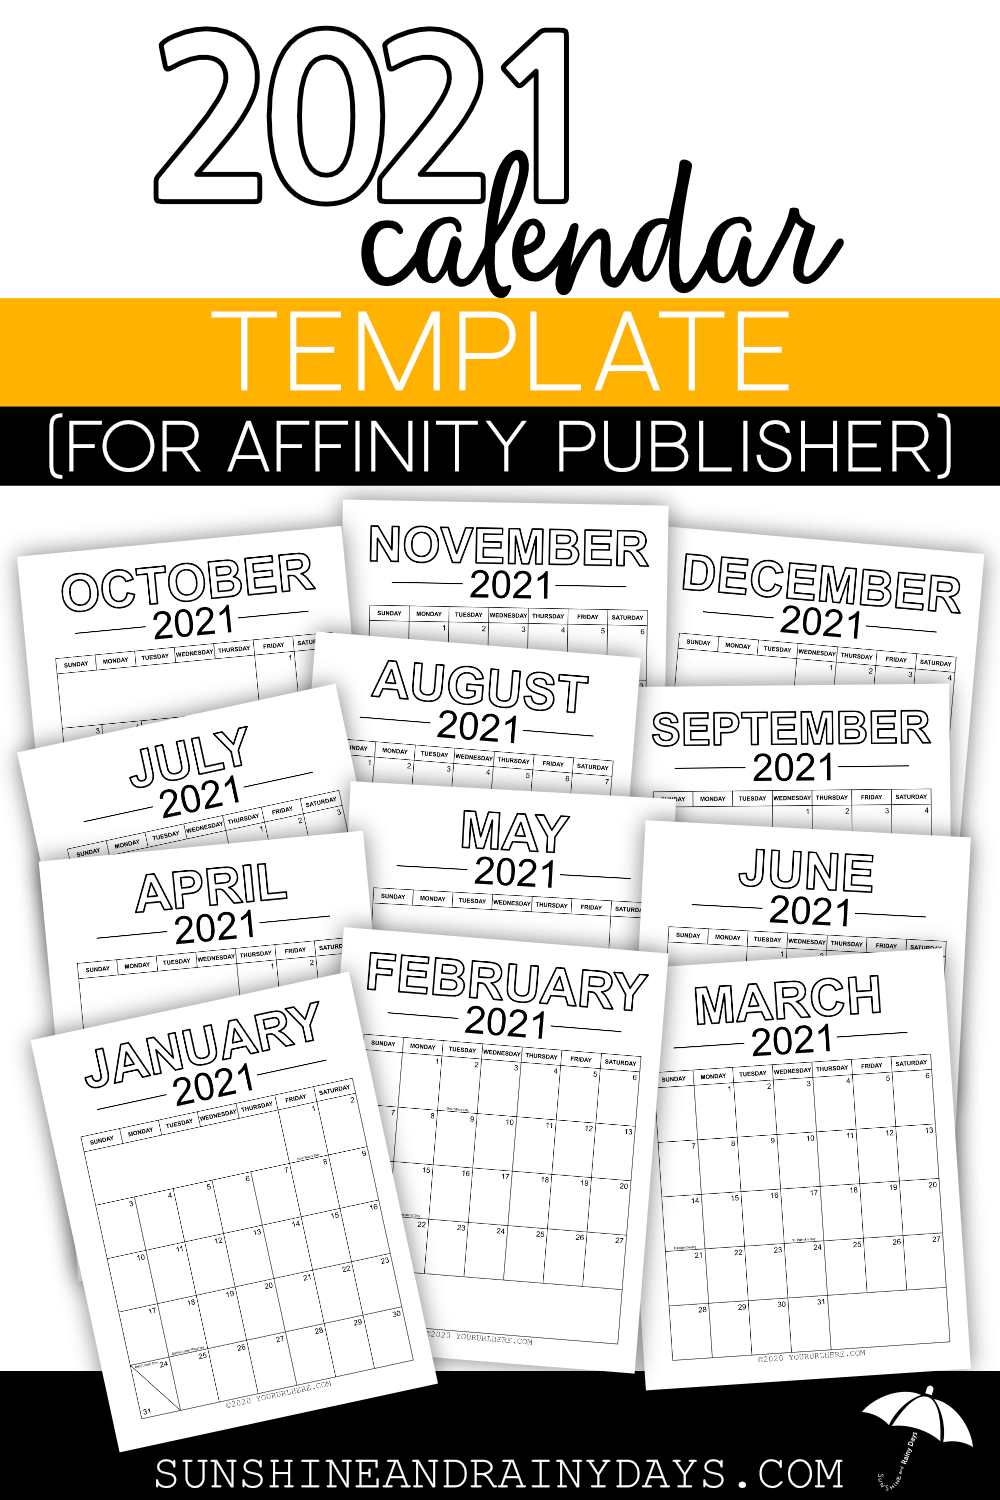 2021 Calendar Template (for Affinity Publisher)